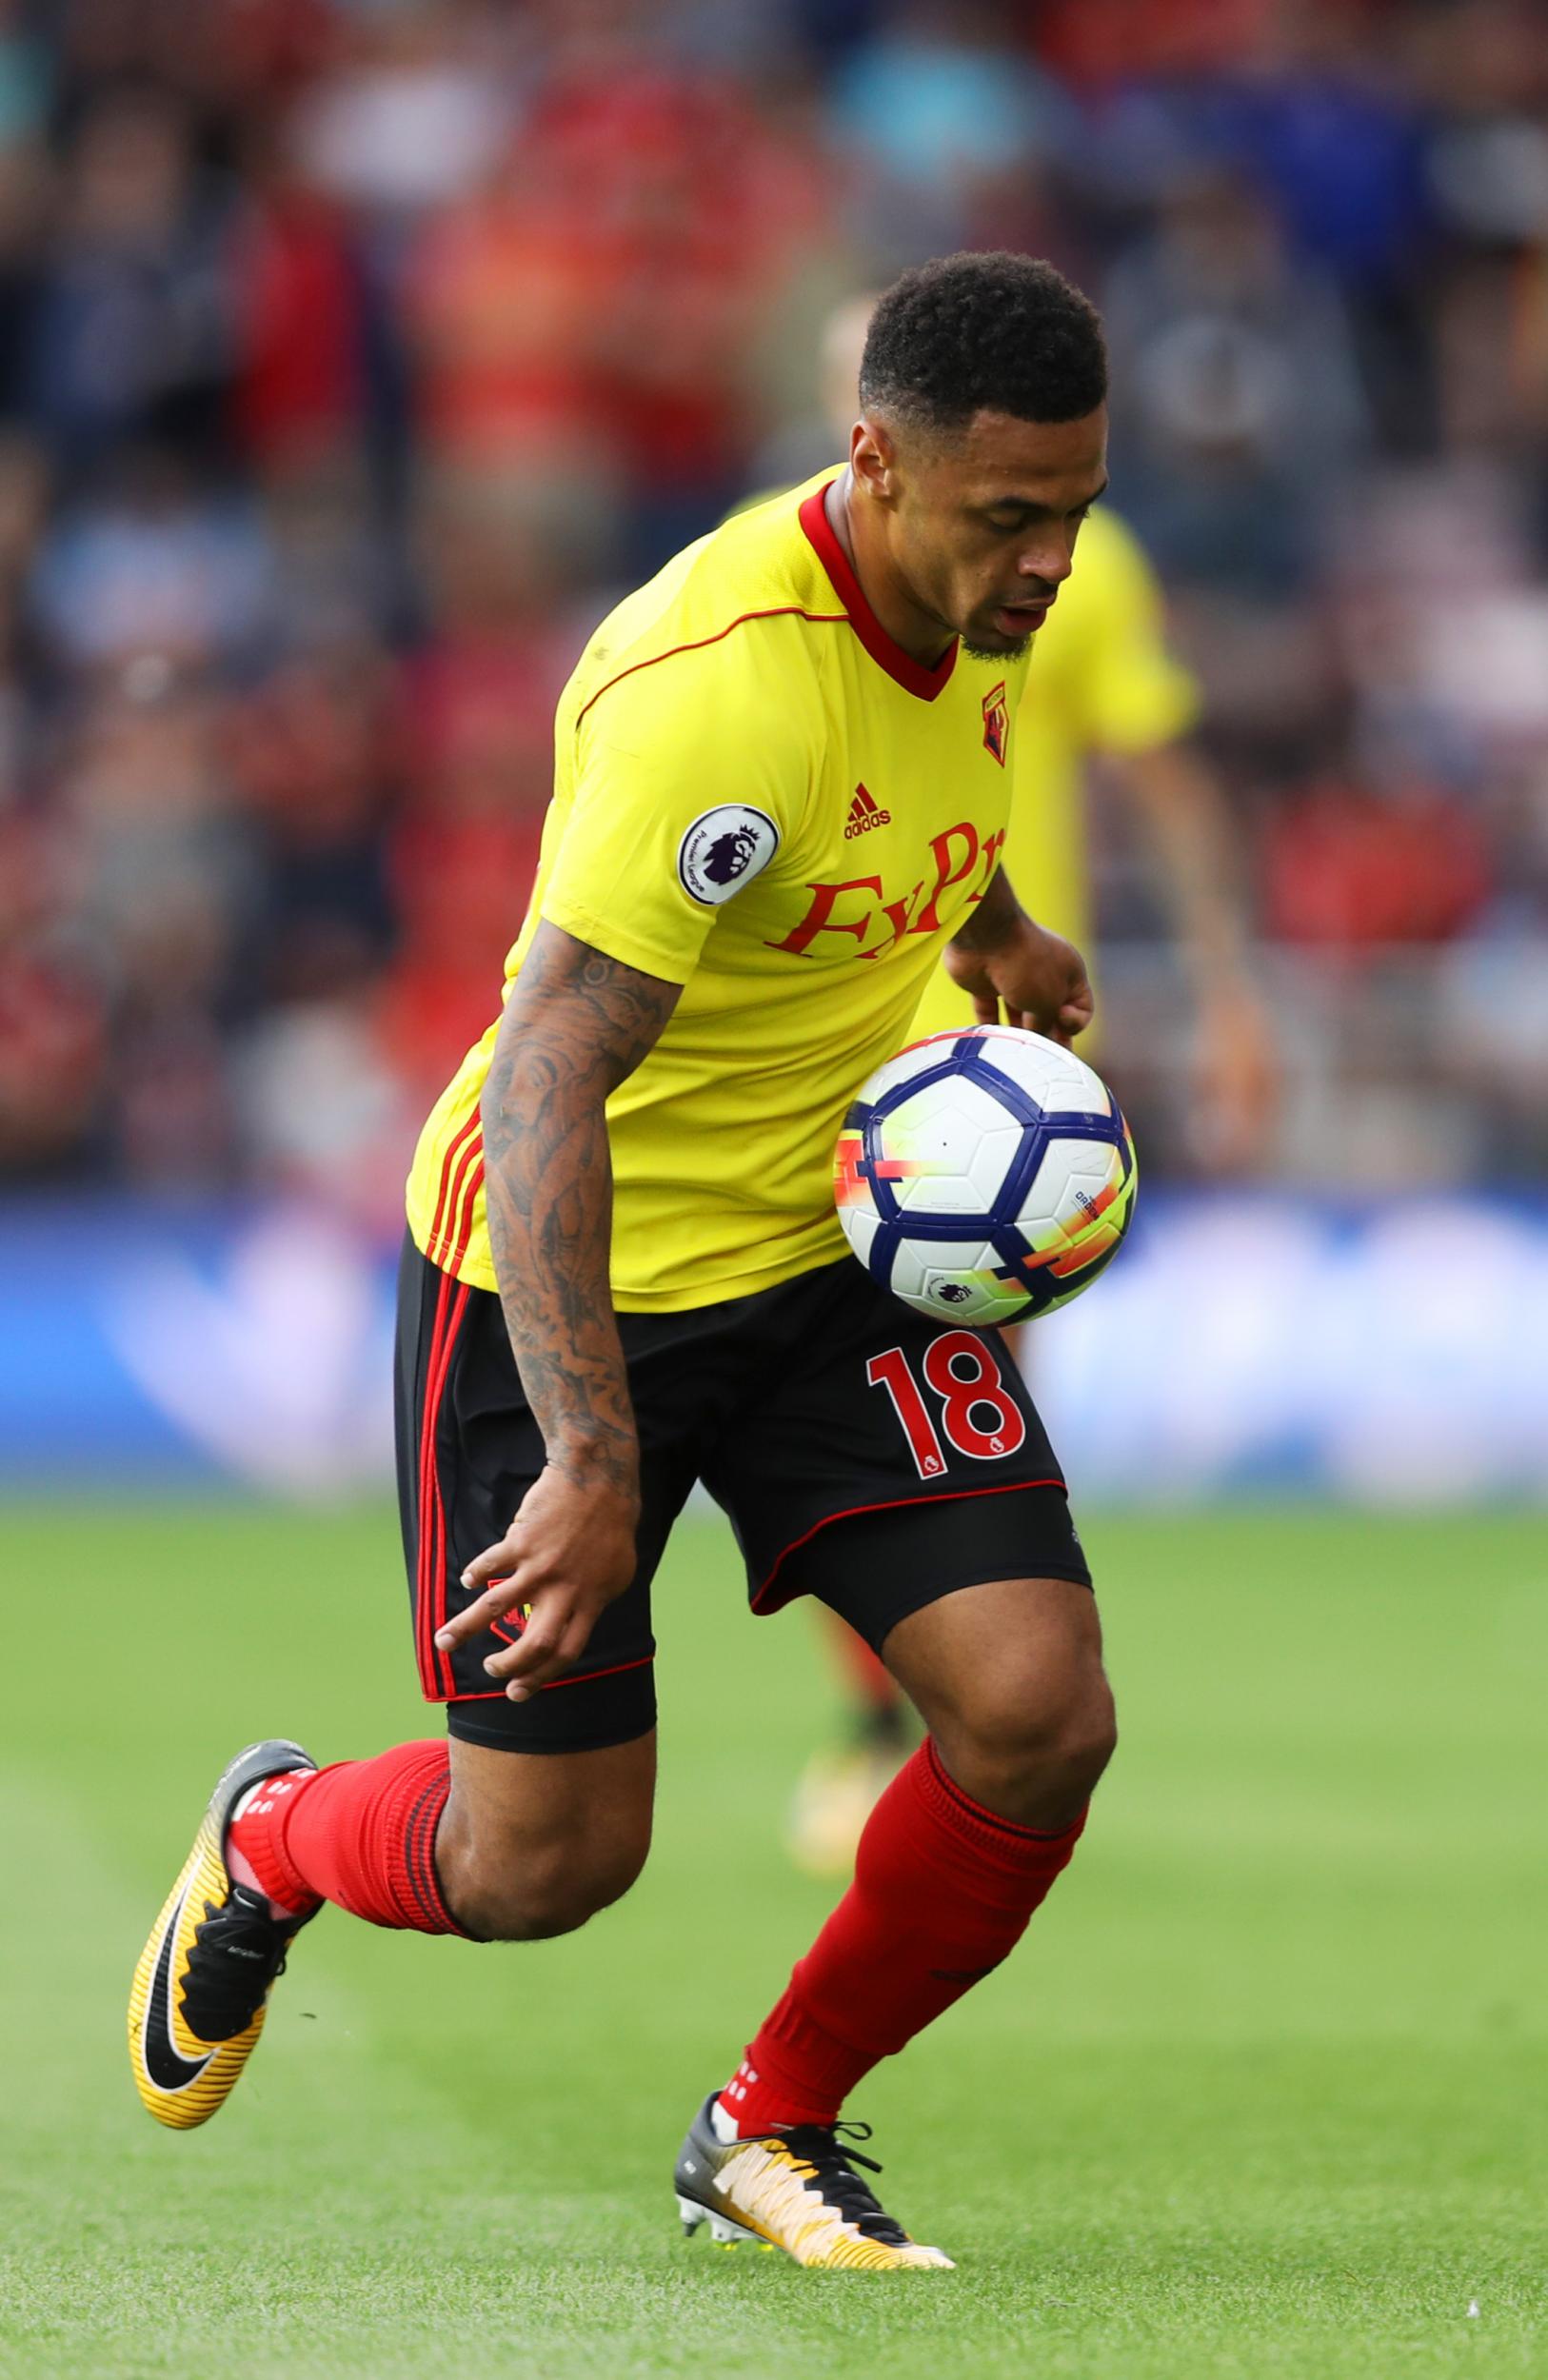 Gray is yet to score for Watford